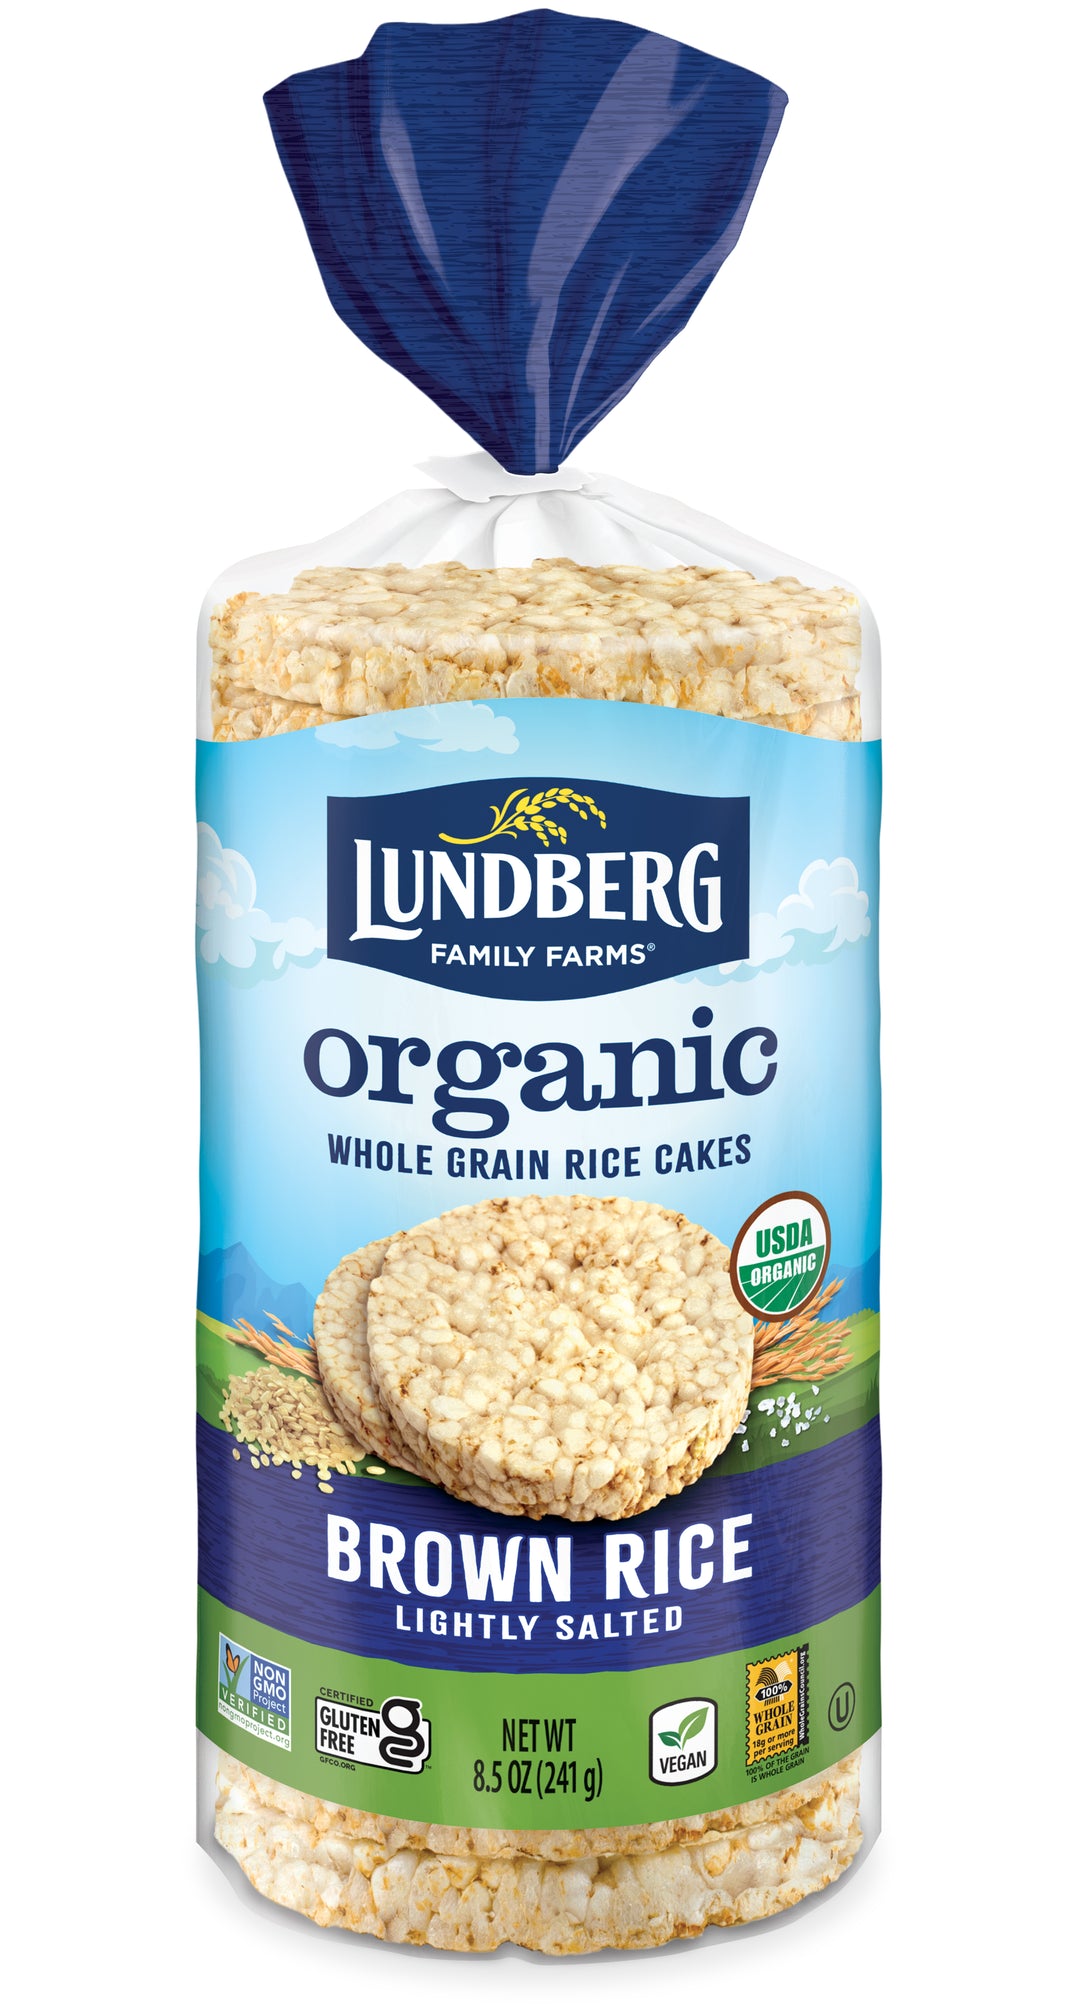 Lundberg Family Farms Brown Rice Cakes Lightly Salted-8.5 oz.-6/Case